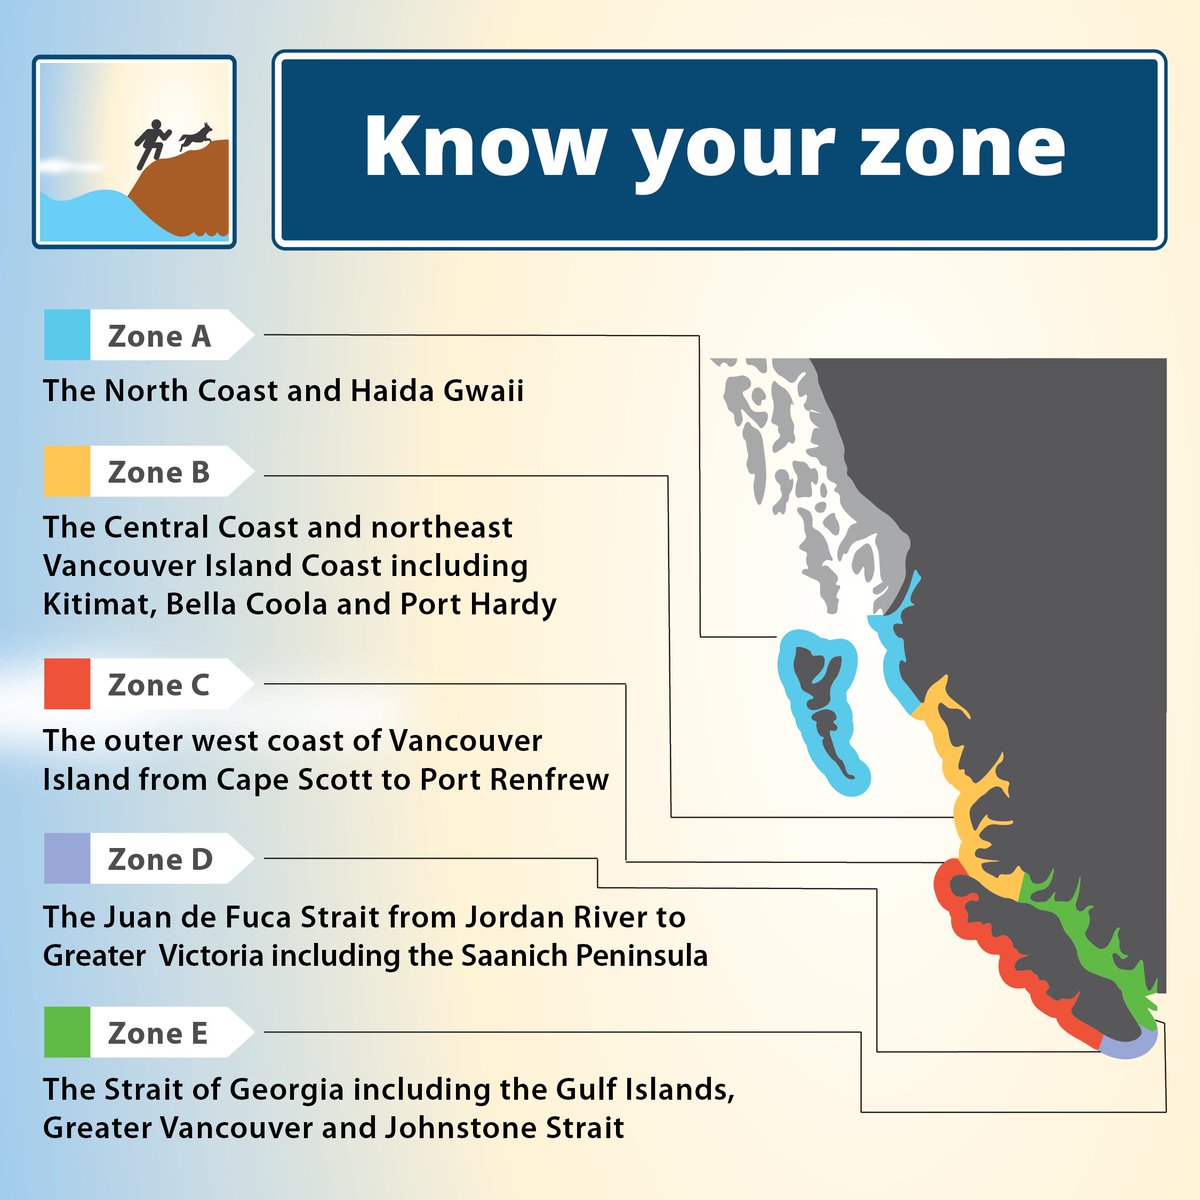 We are giving away 9 grab-&-go bags this #TsunamiPreparednessWeek 🌊 To participate in Day 1: comment a coastal area & its notification zone (ex. Ucluelet Zone C) ✔️ Find detailed zone maps here: PreparedBC.ca/tsunamis Enter on FB & IG, too! Ends Apr 20